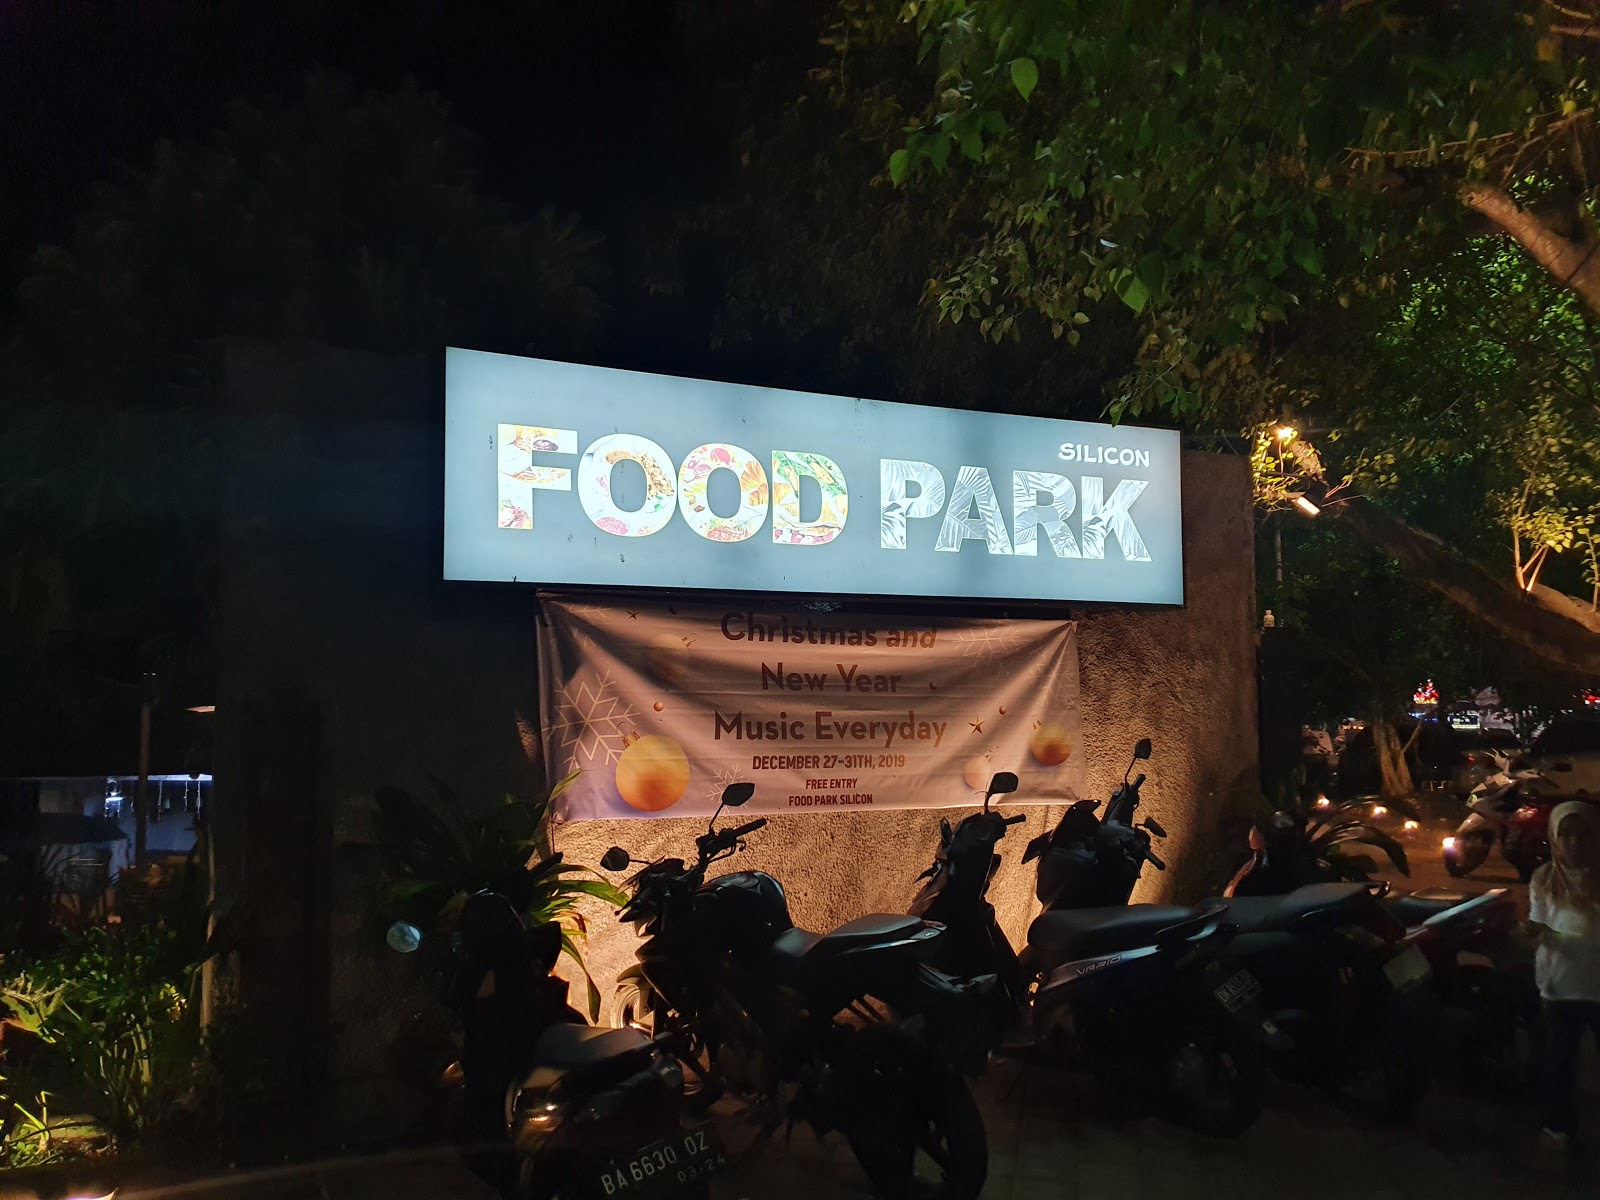 Cafe FOOD PARK SILICON 13774